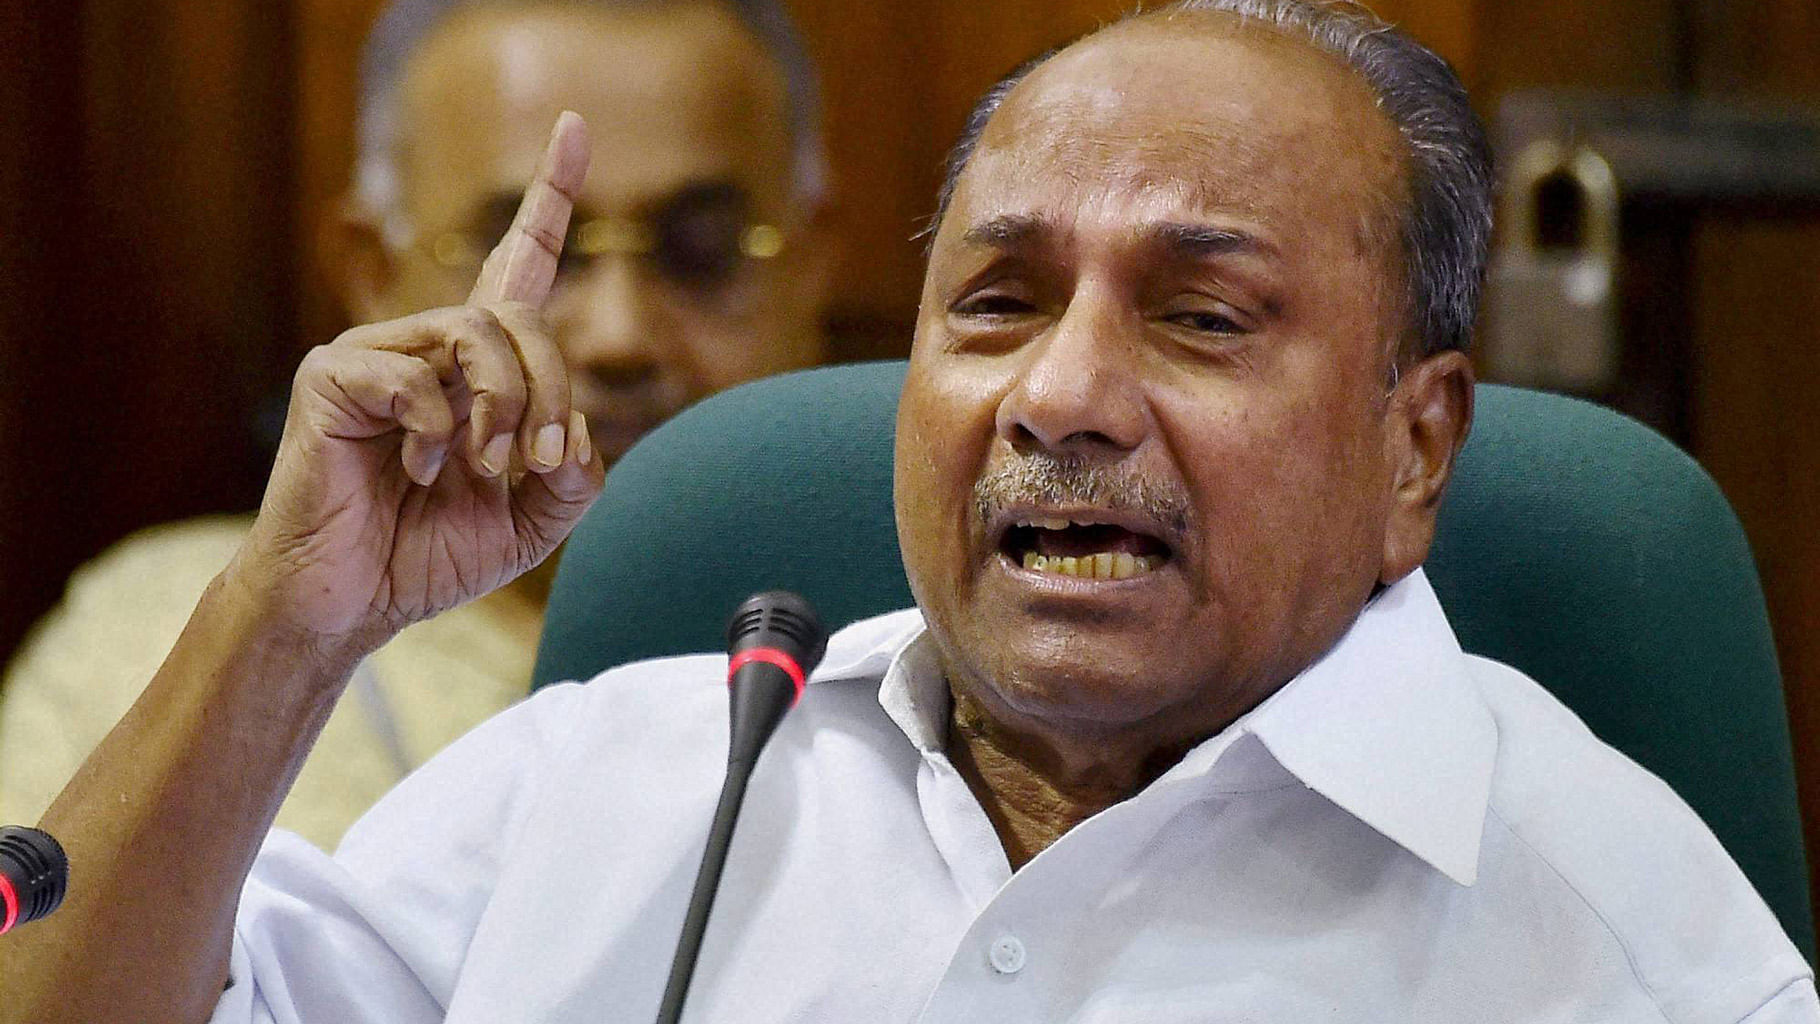  Former Defence Minister AK Antony addresses a press conference at Parliament House in New Delhi on Wednesday regarding the VVIP chopper scam. (Photo: PTI)